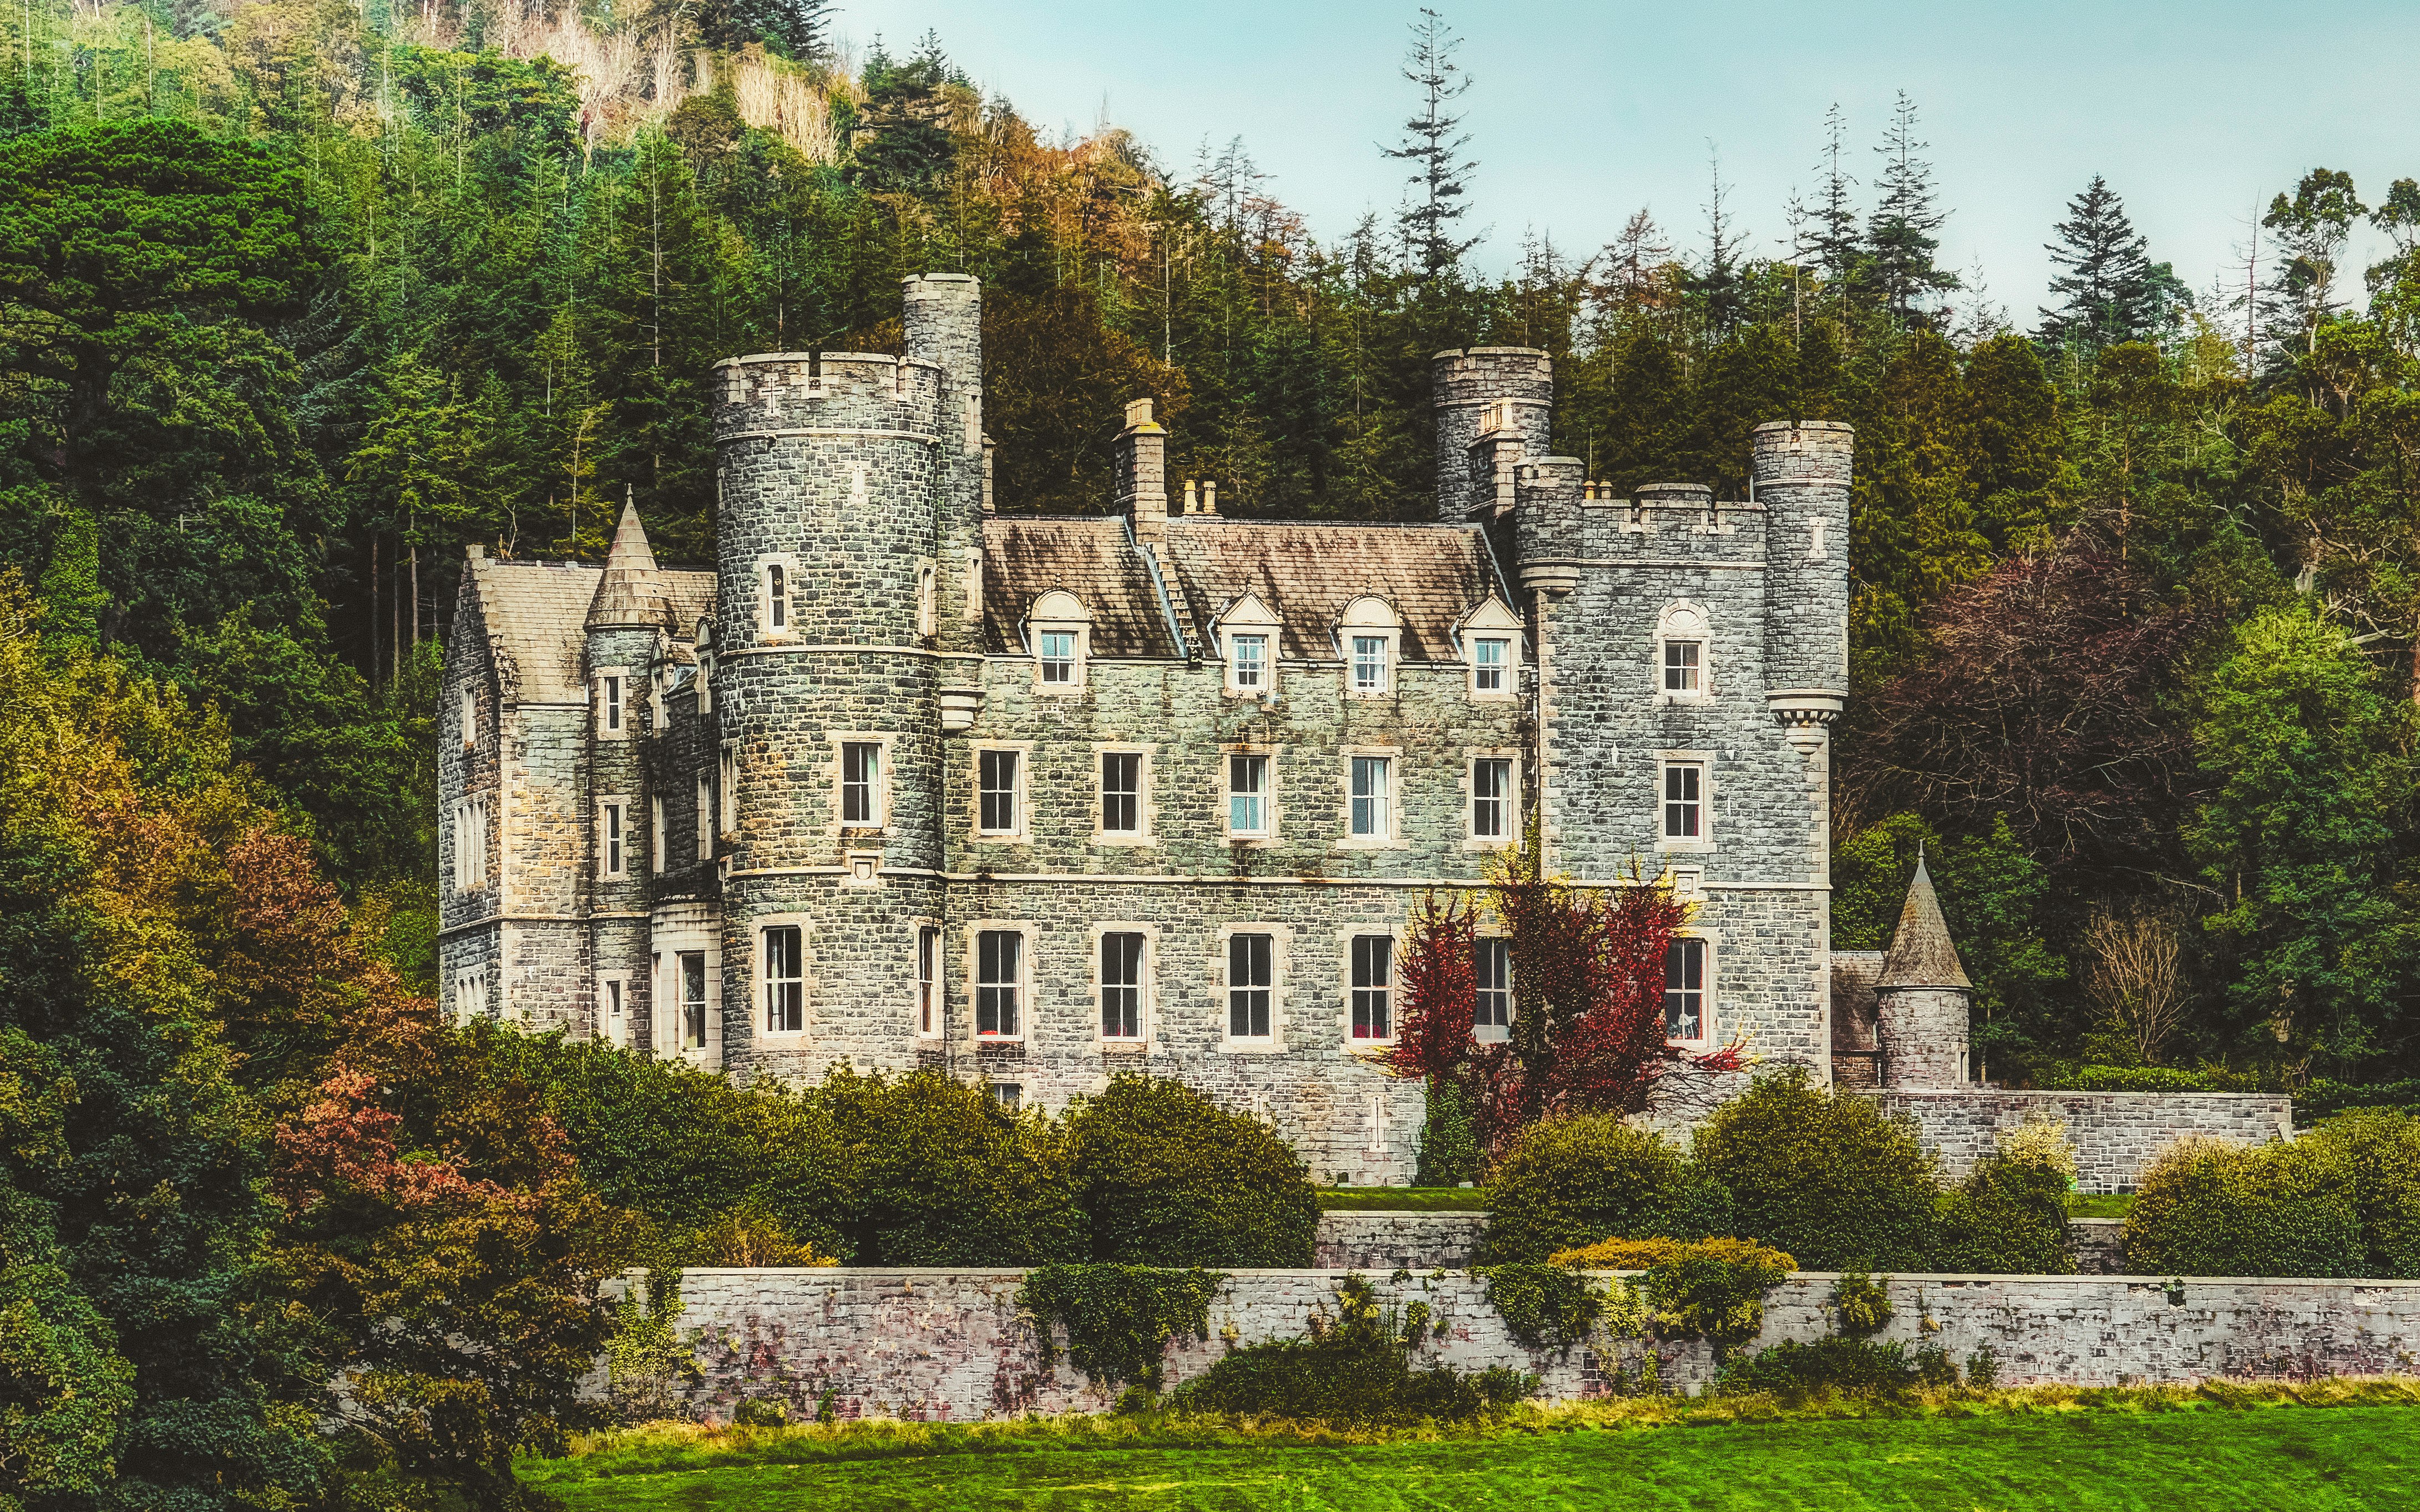 Castlewellan Castle in the Castlewellan Forest Park in County Down (Sep., 2020).